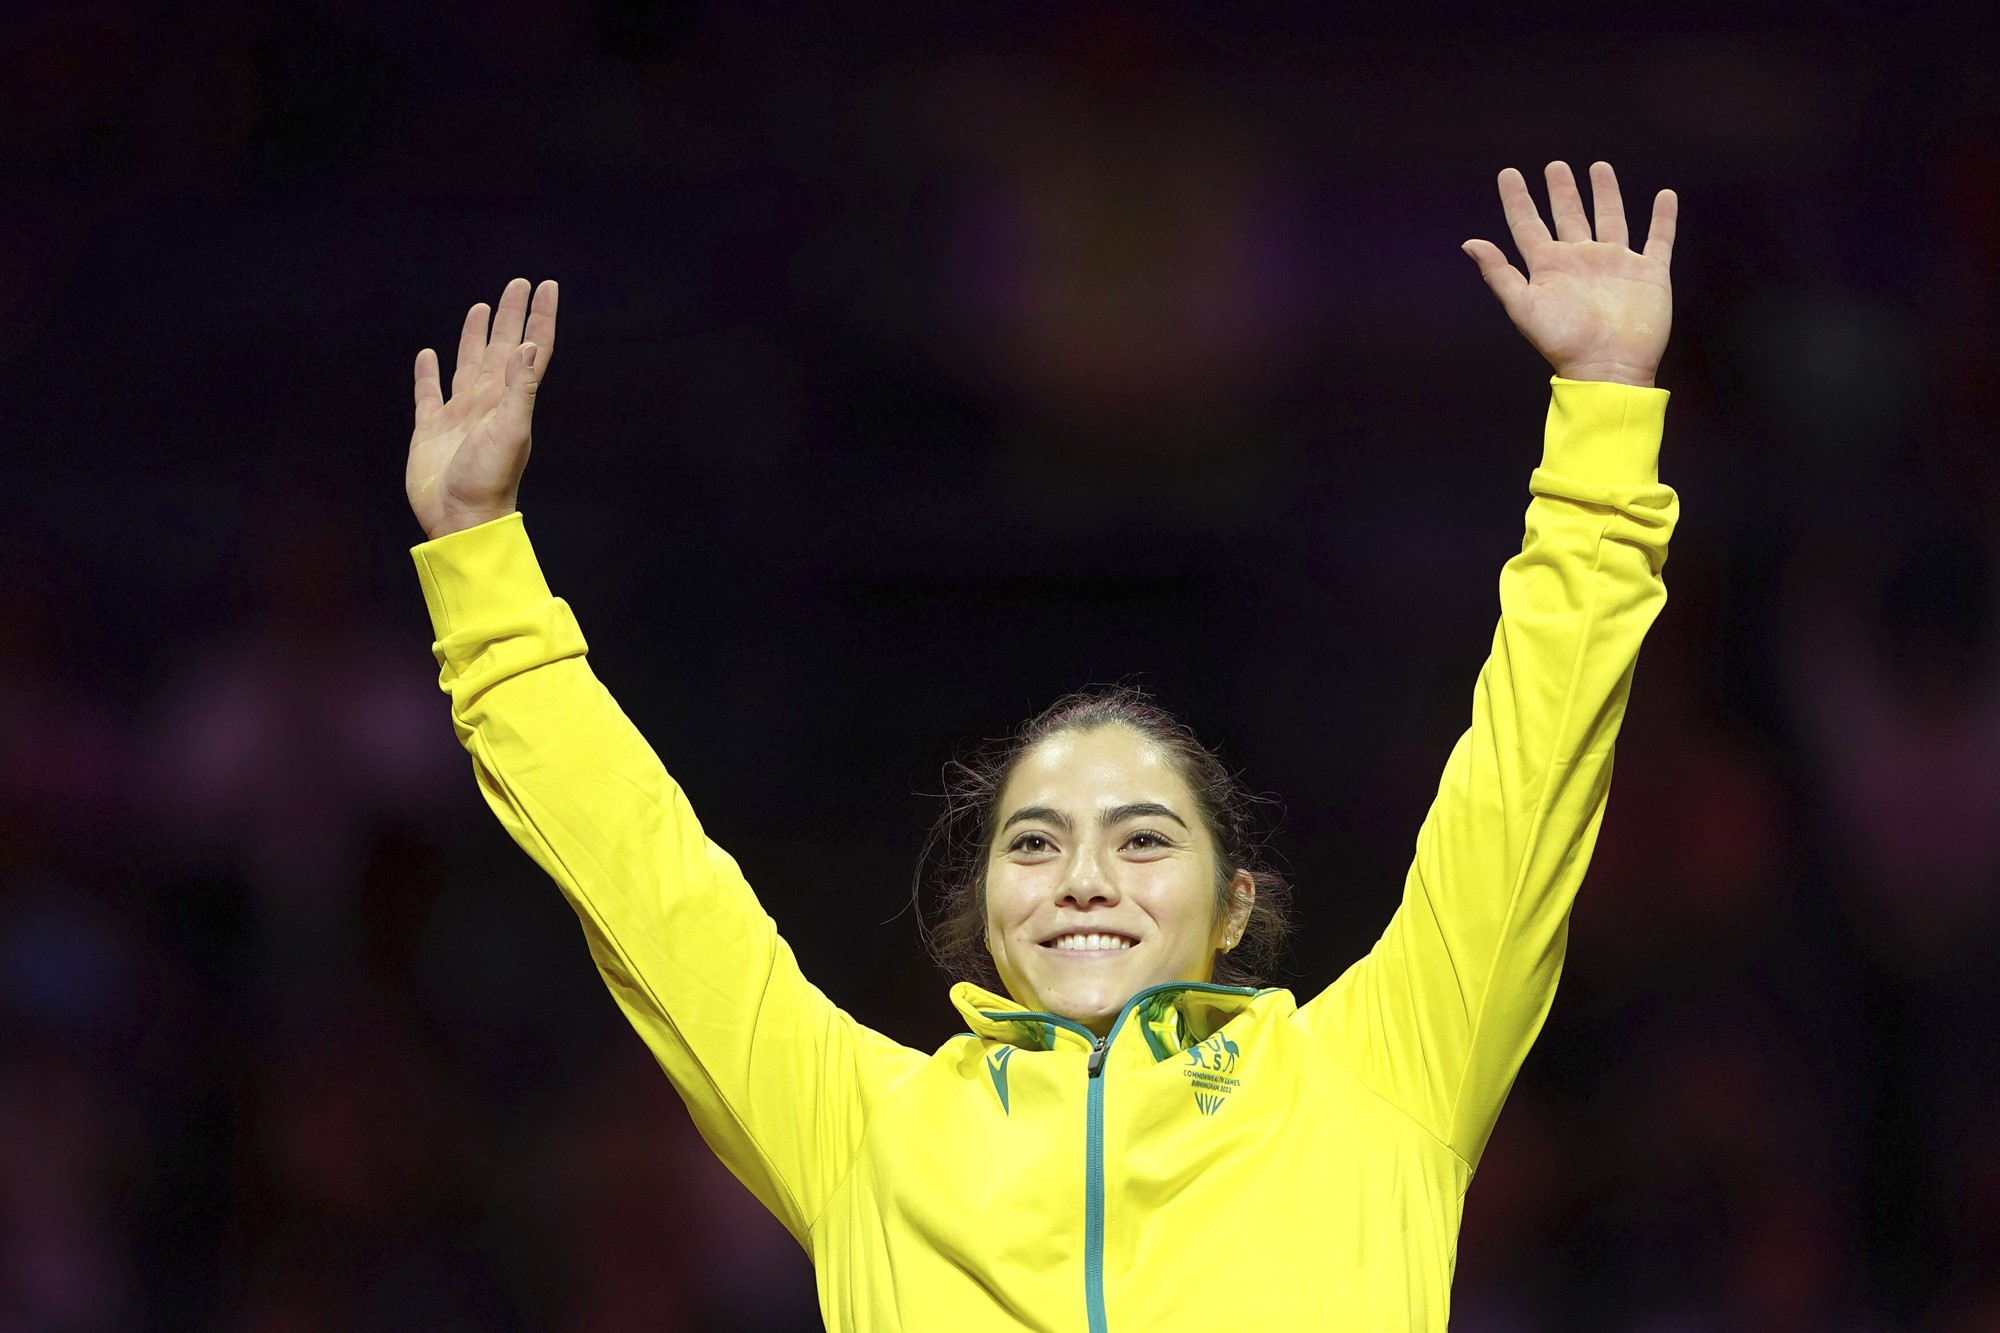 gymnast georgia godwin smiles and waves both arms in the air wearing a yellow australia branded jacket